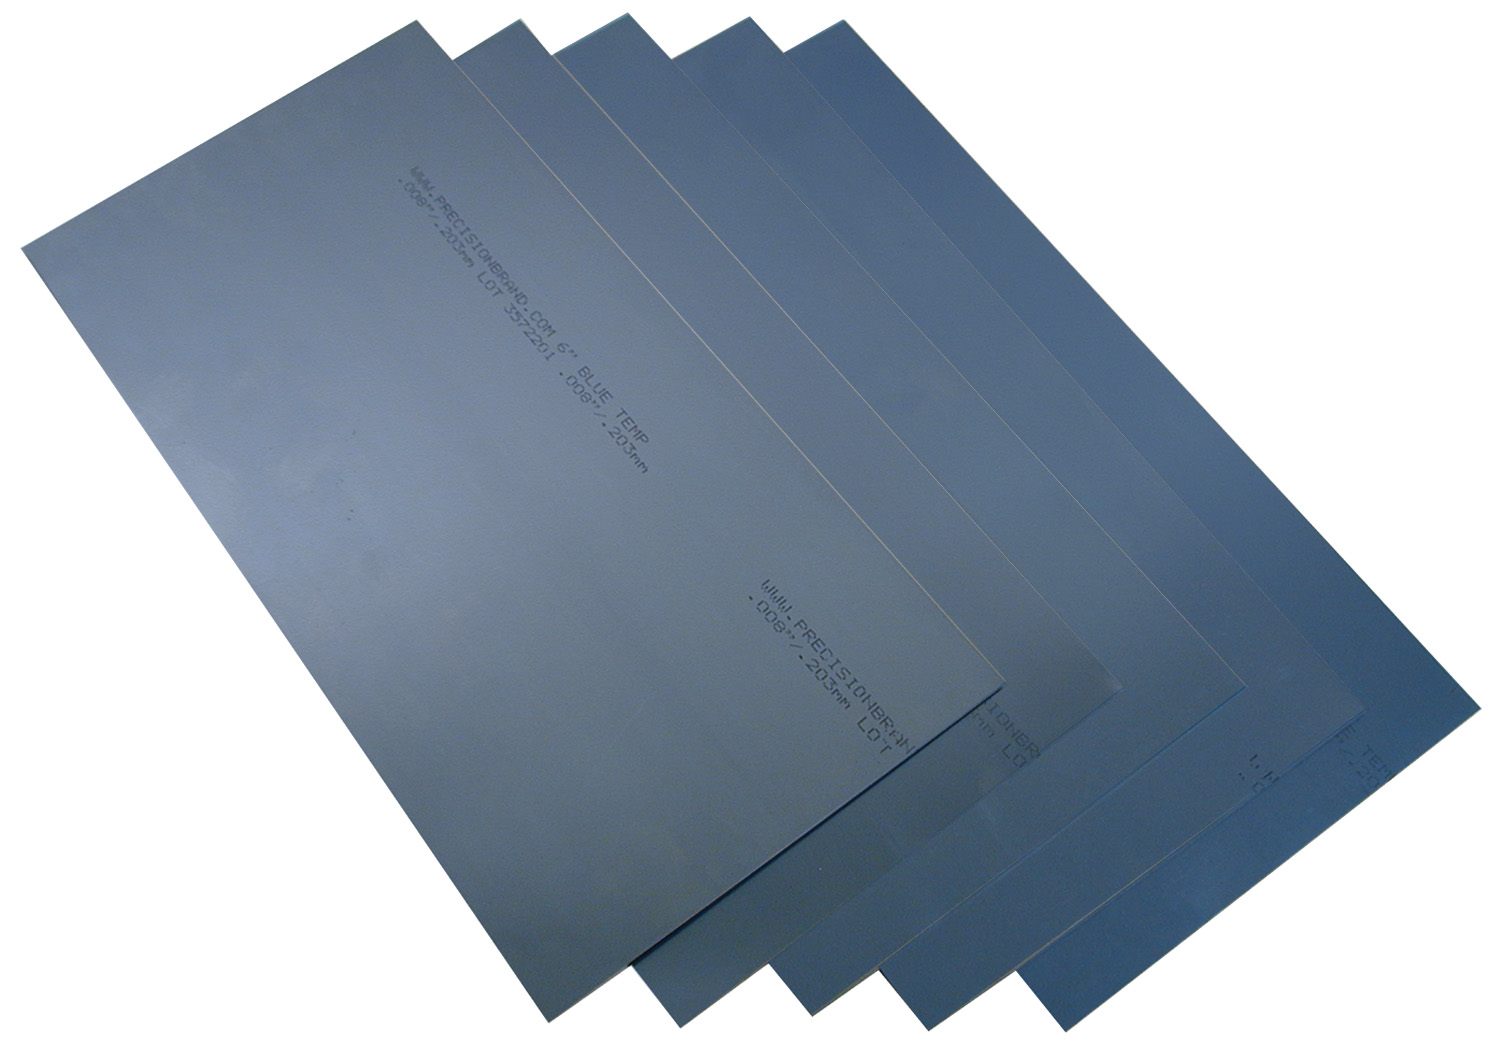 New Blue Tempered Spring Steel Shim 0.025 Thick x 12.375 Width x 60 Length 2XI-2516ZR Warranity by KolotovichTool